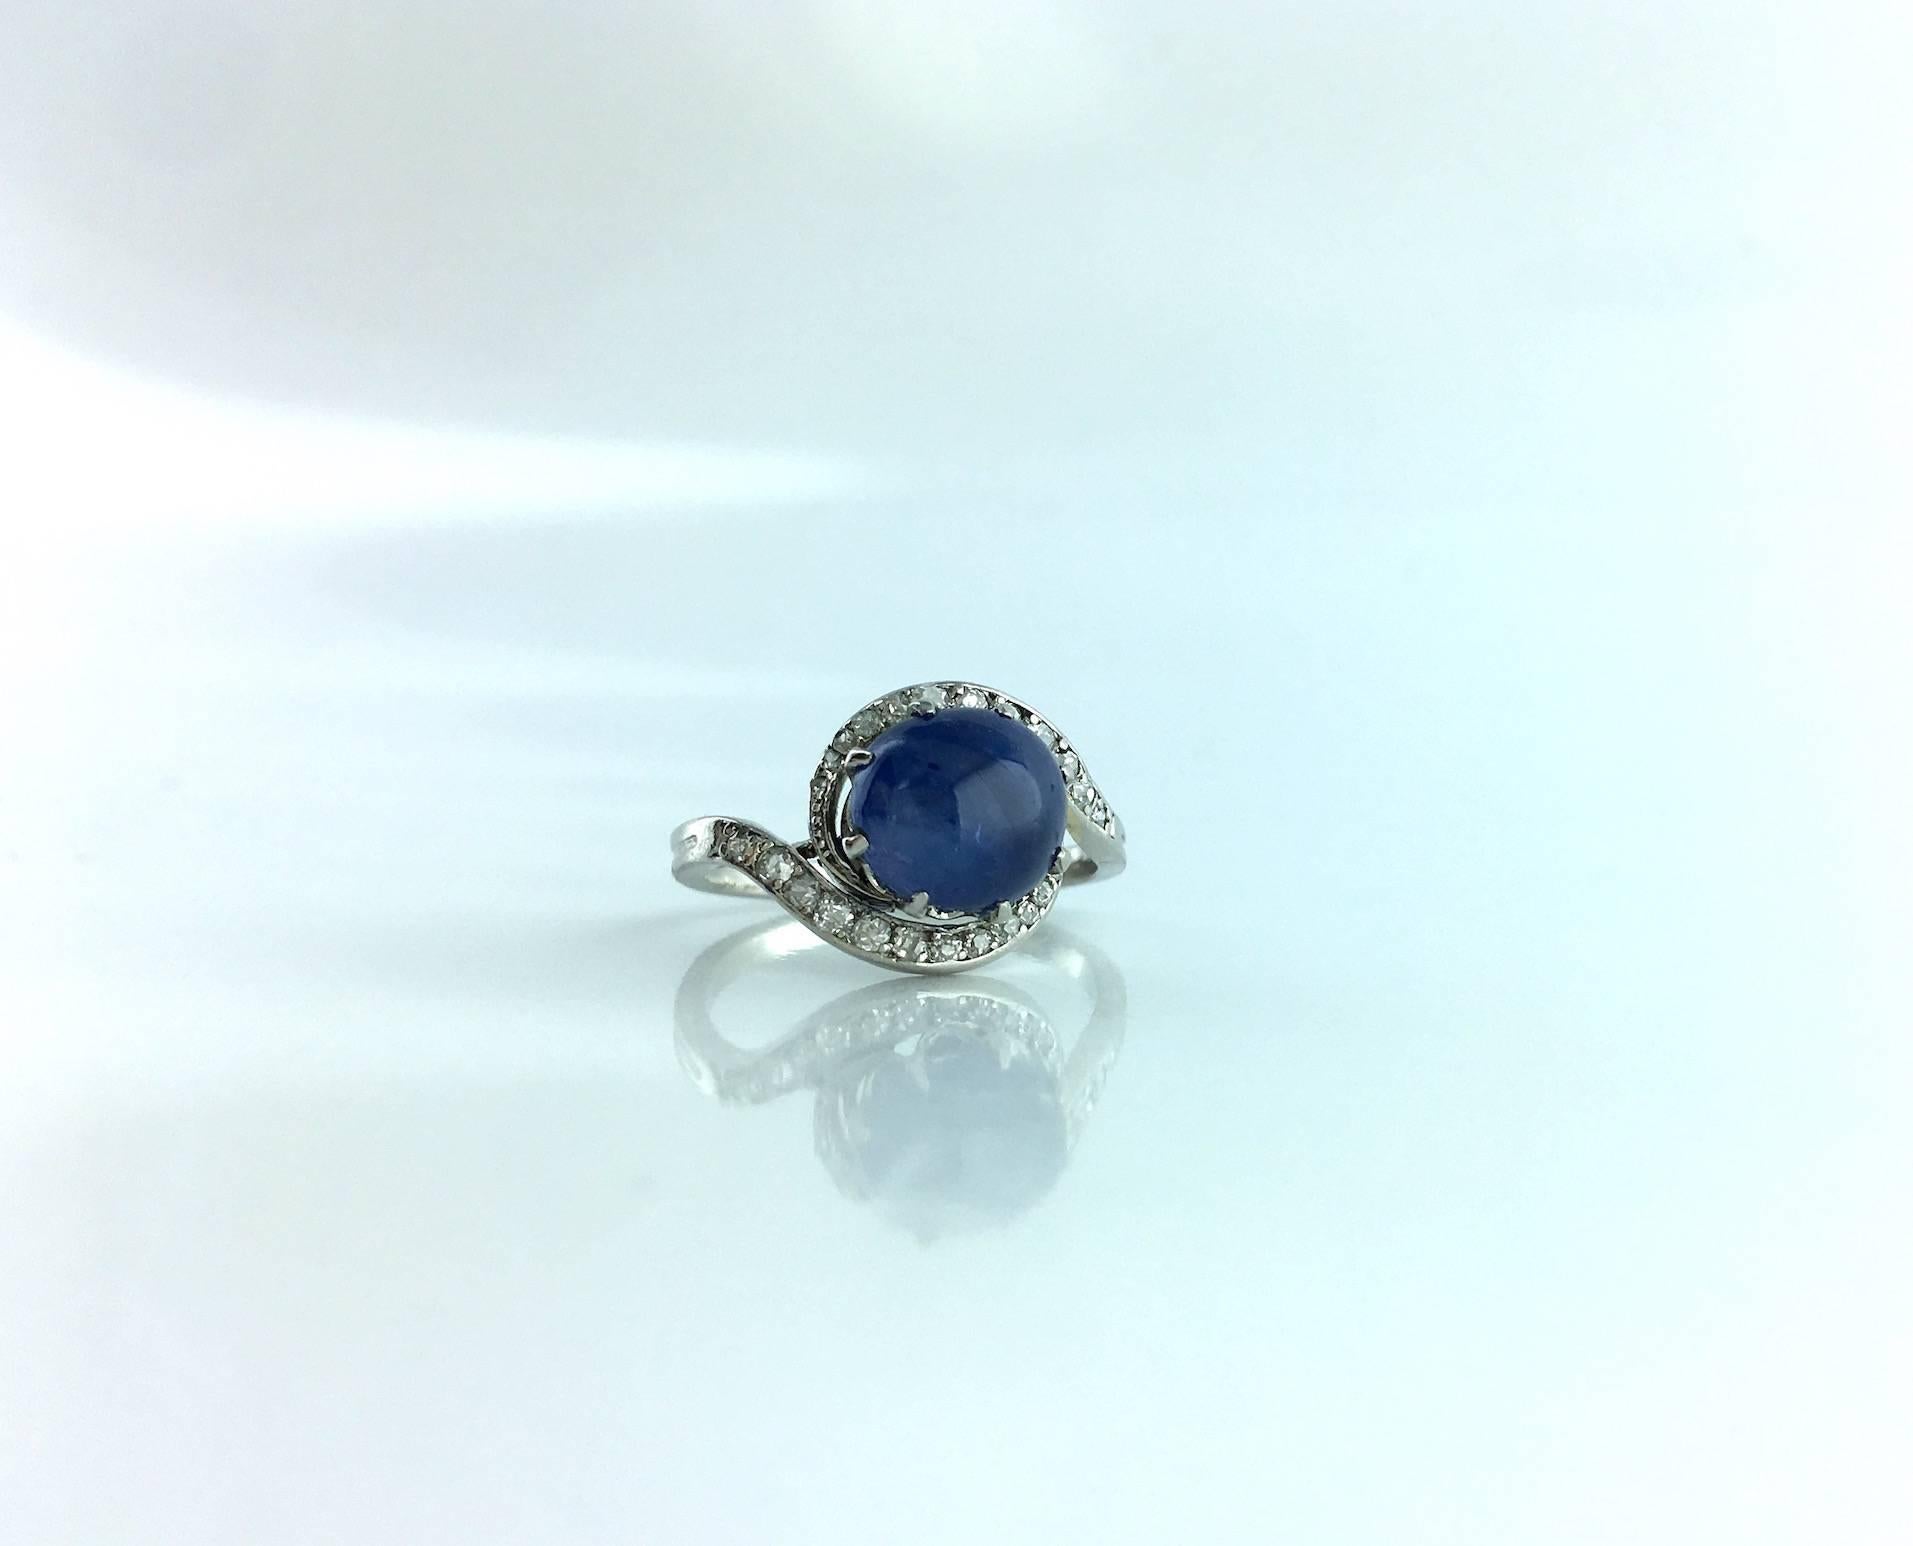 3.67 carats Natural Sapphire Non heated surrounded by Old-mine cut Diamond mounted on Platinum.
French marks.
Circa 1900.

Gross weight: 5.36 grams.